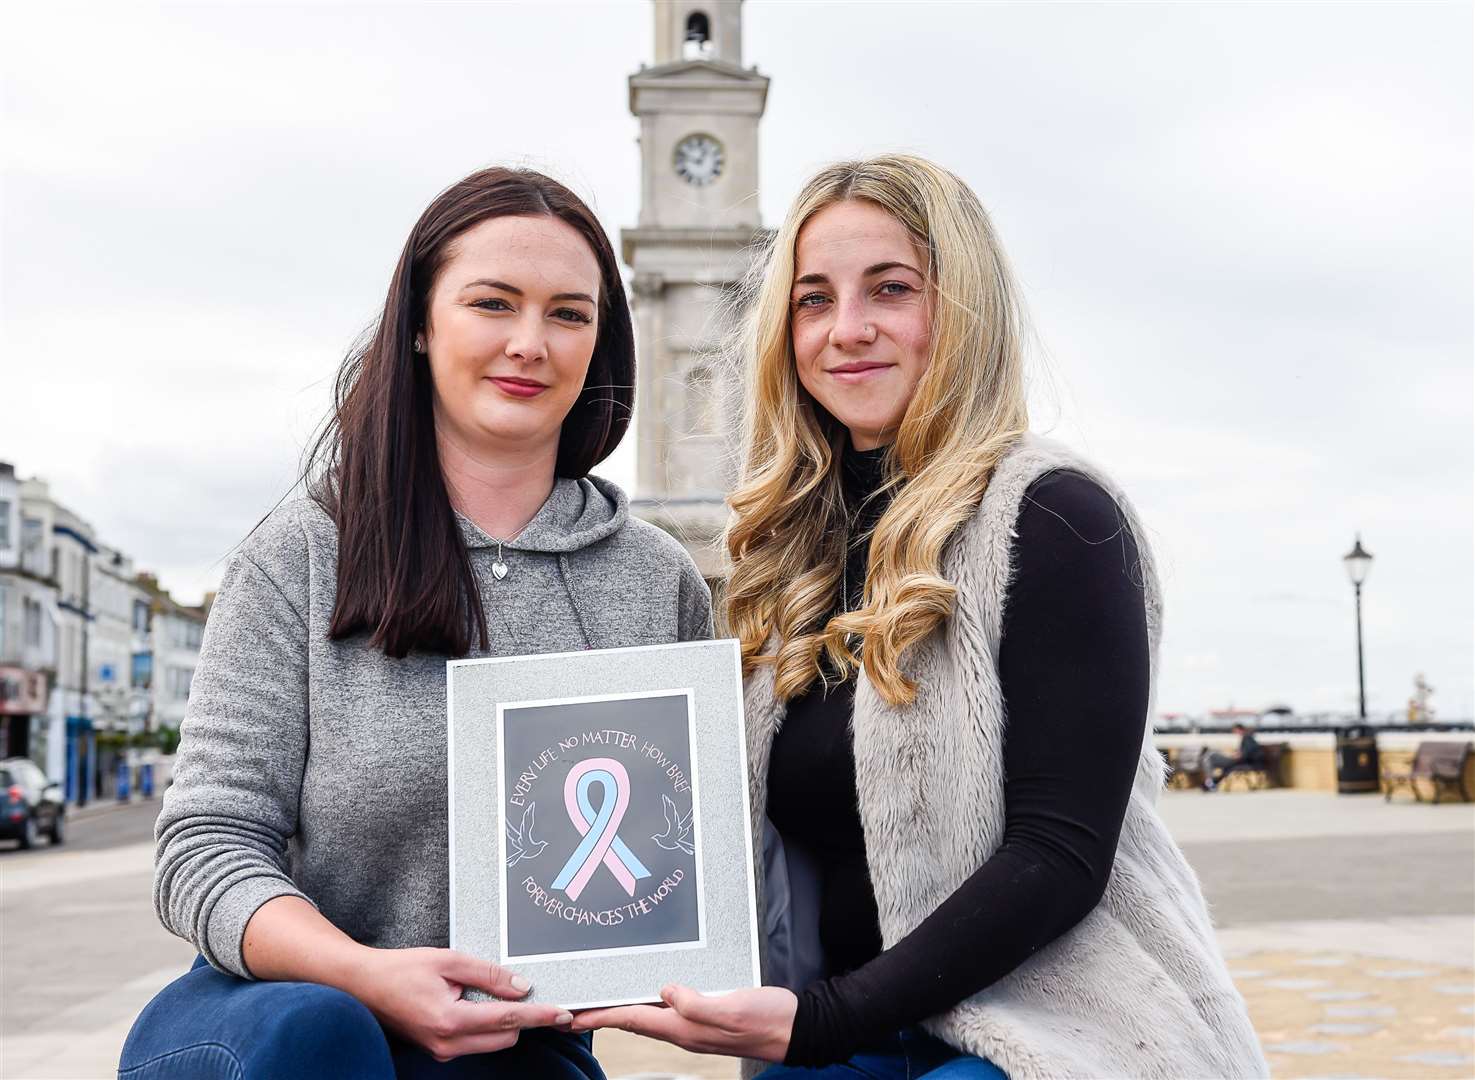 Laura Carver and Carys Groombridge in front of the clock tower in Herne Bay, which will light up pink and blue to mark Baby Loss Awareness Week